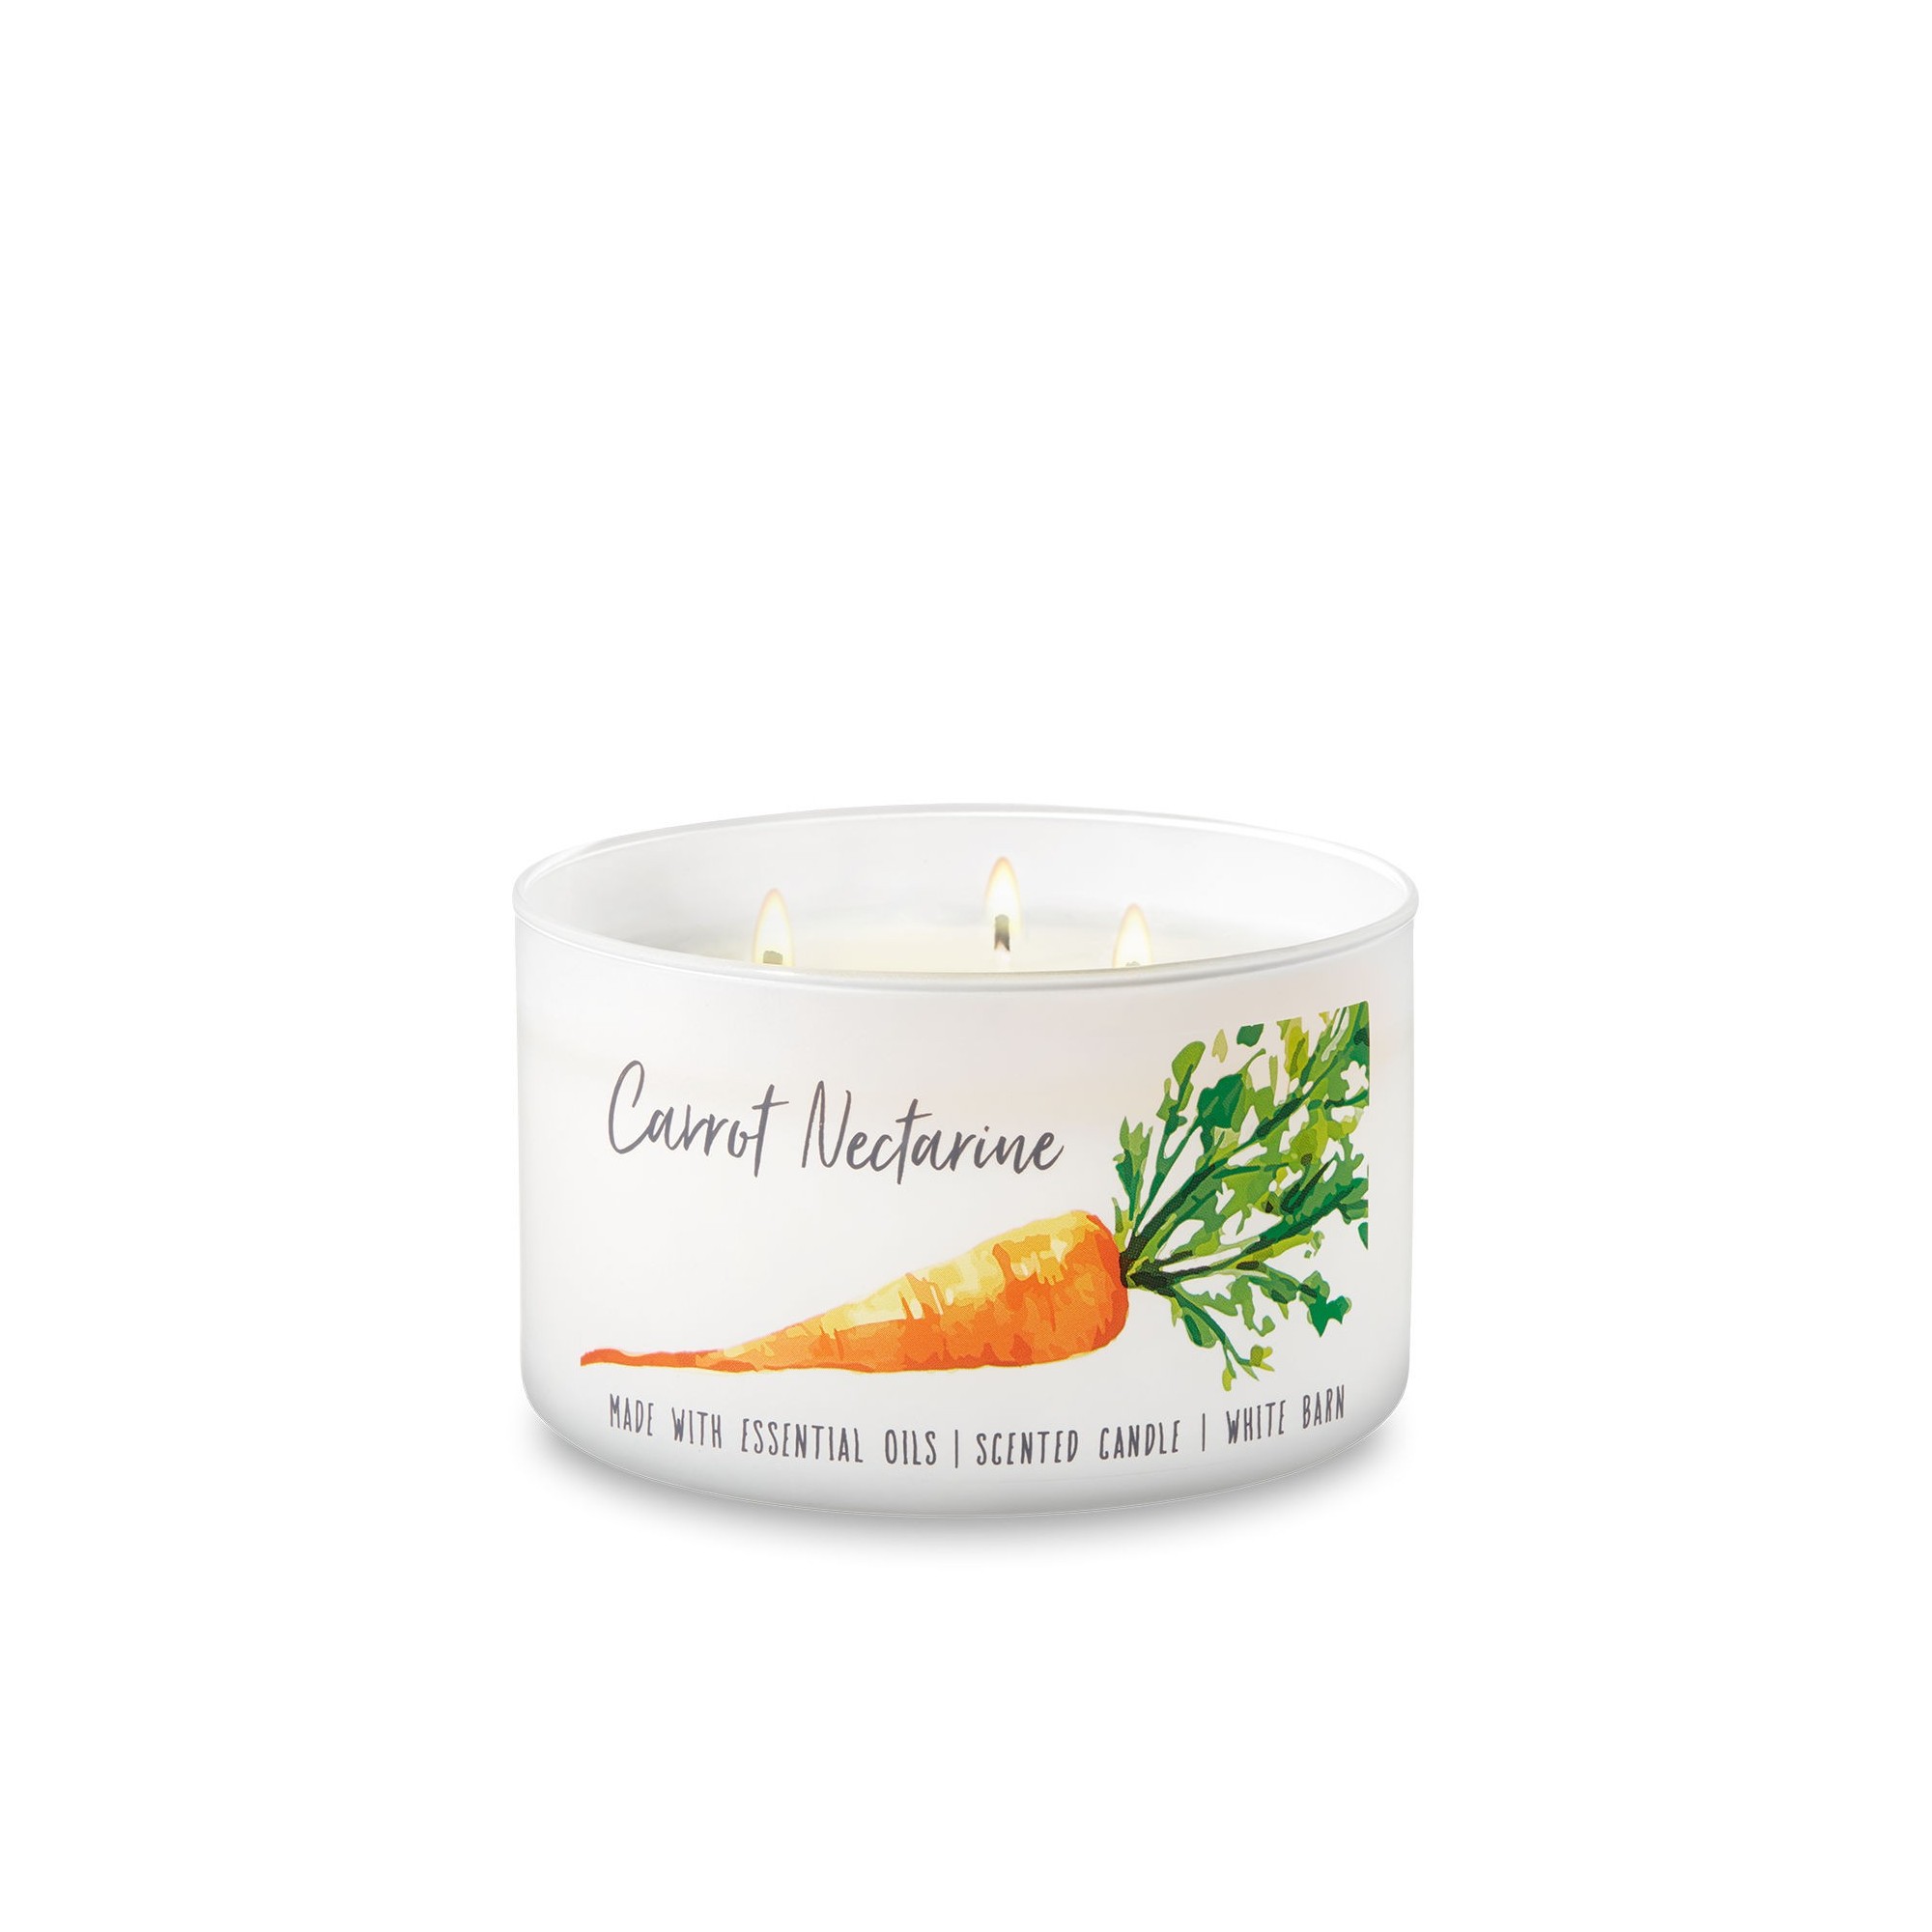 Bath & Body Works White Barn Carrot Nectarine 3 Wick Scented Candle